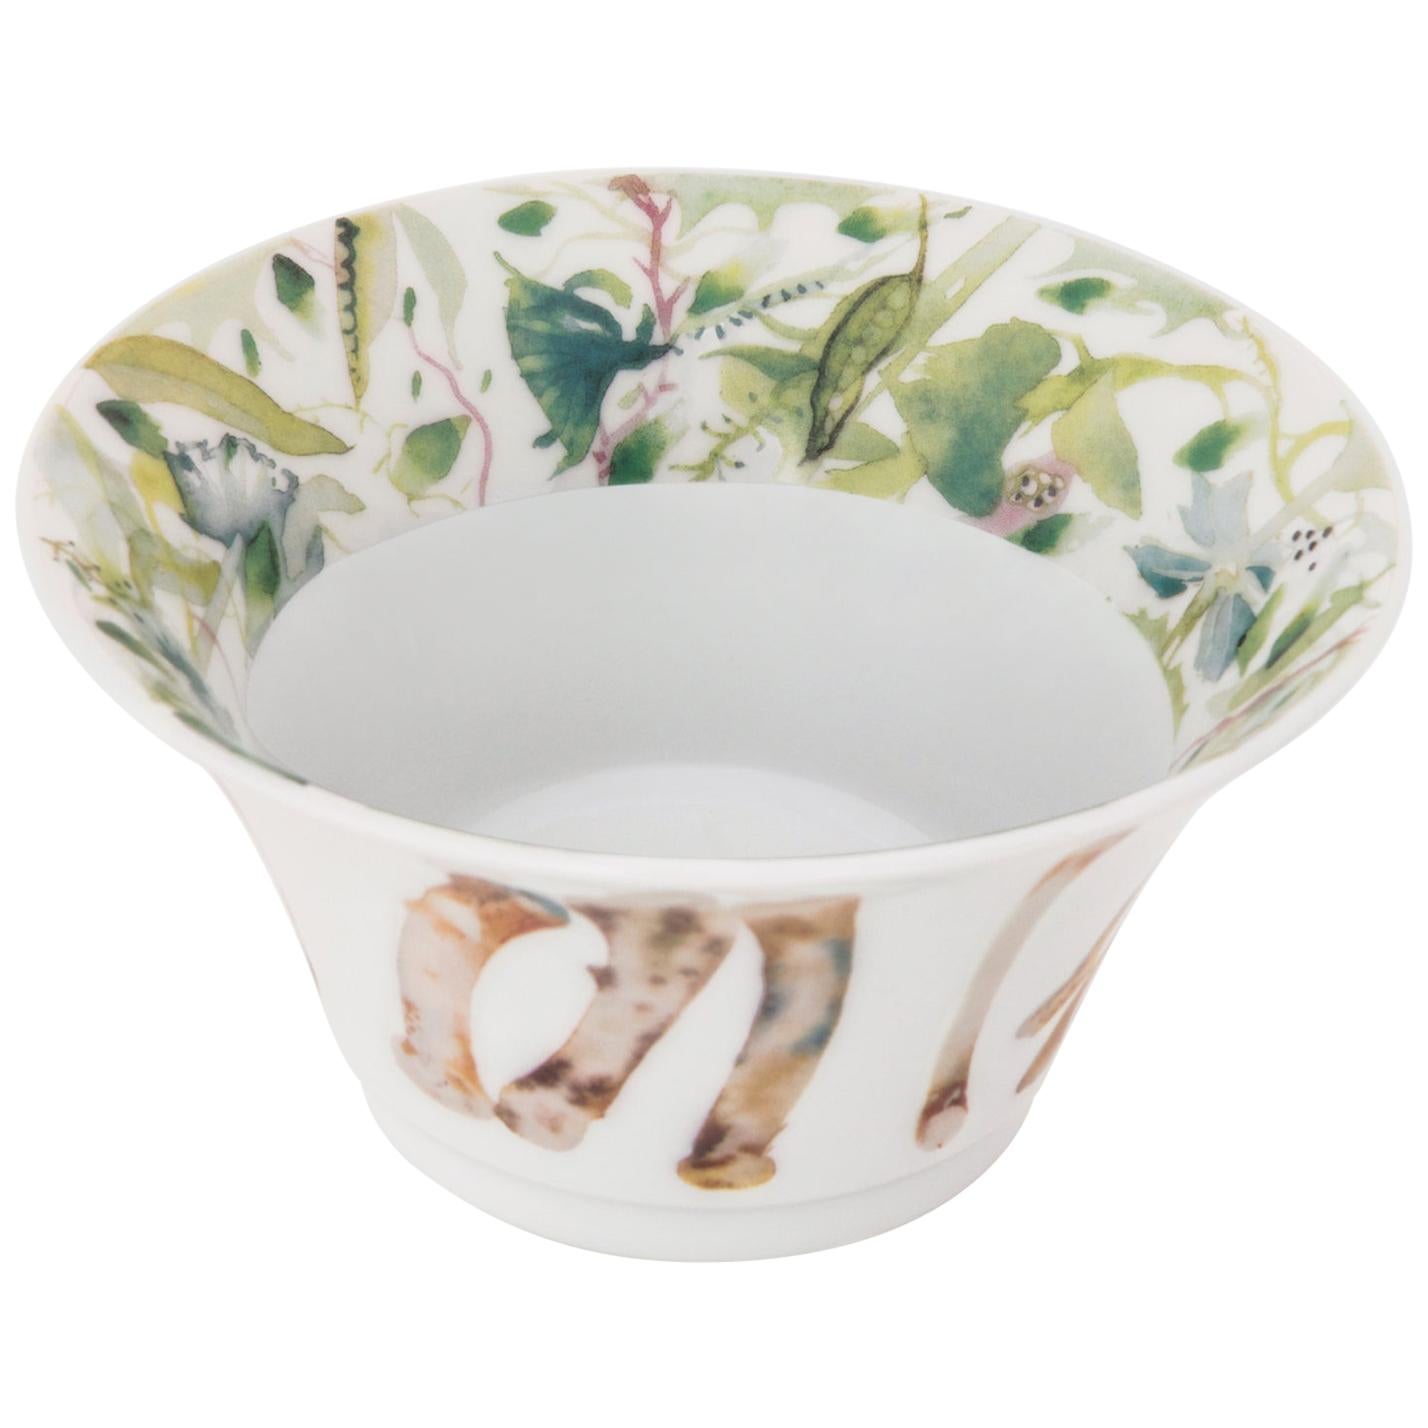 Green and White French Limoges Porcelain Deep Bowl, Exclusive Edition in Stock